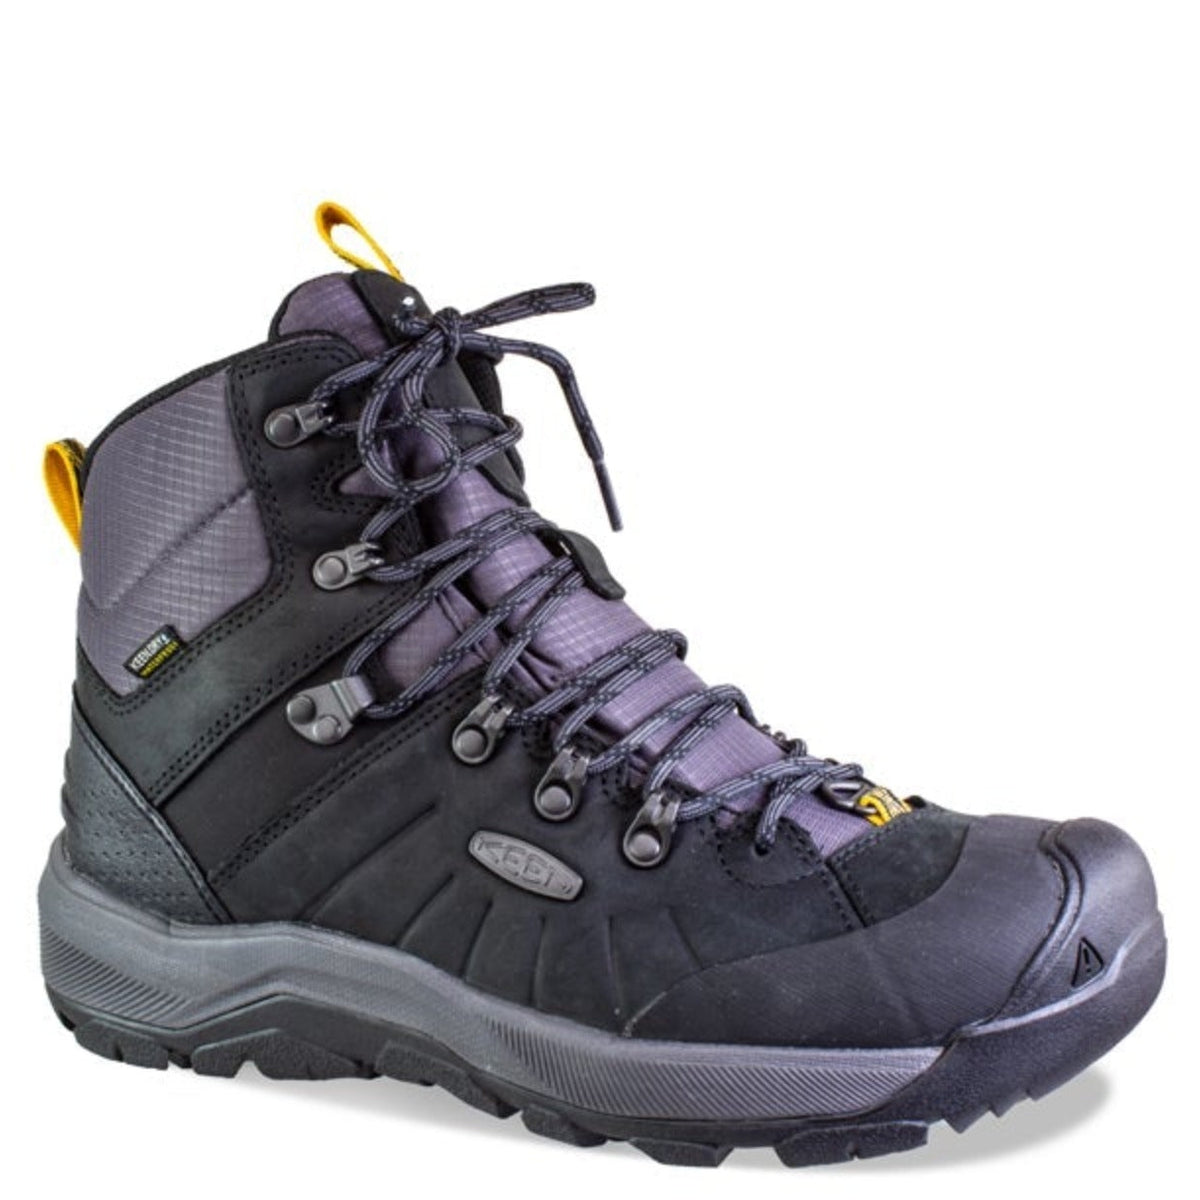 Keen W's Revel IV Mid Polar Winter Boots  Outdoor stores, sports, cycling,  skiing, climbing